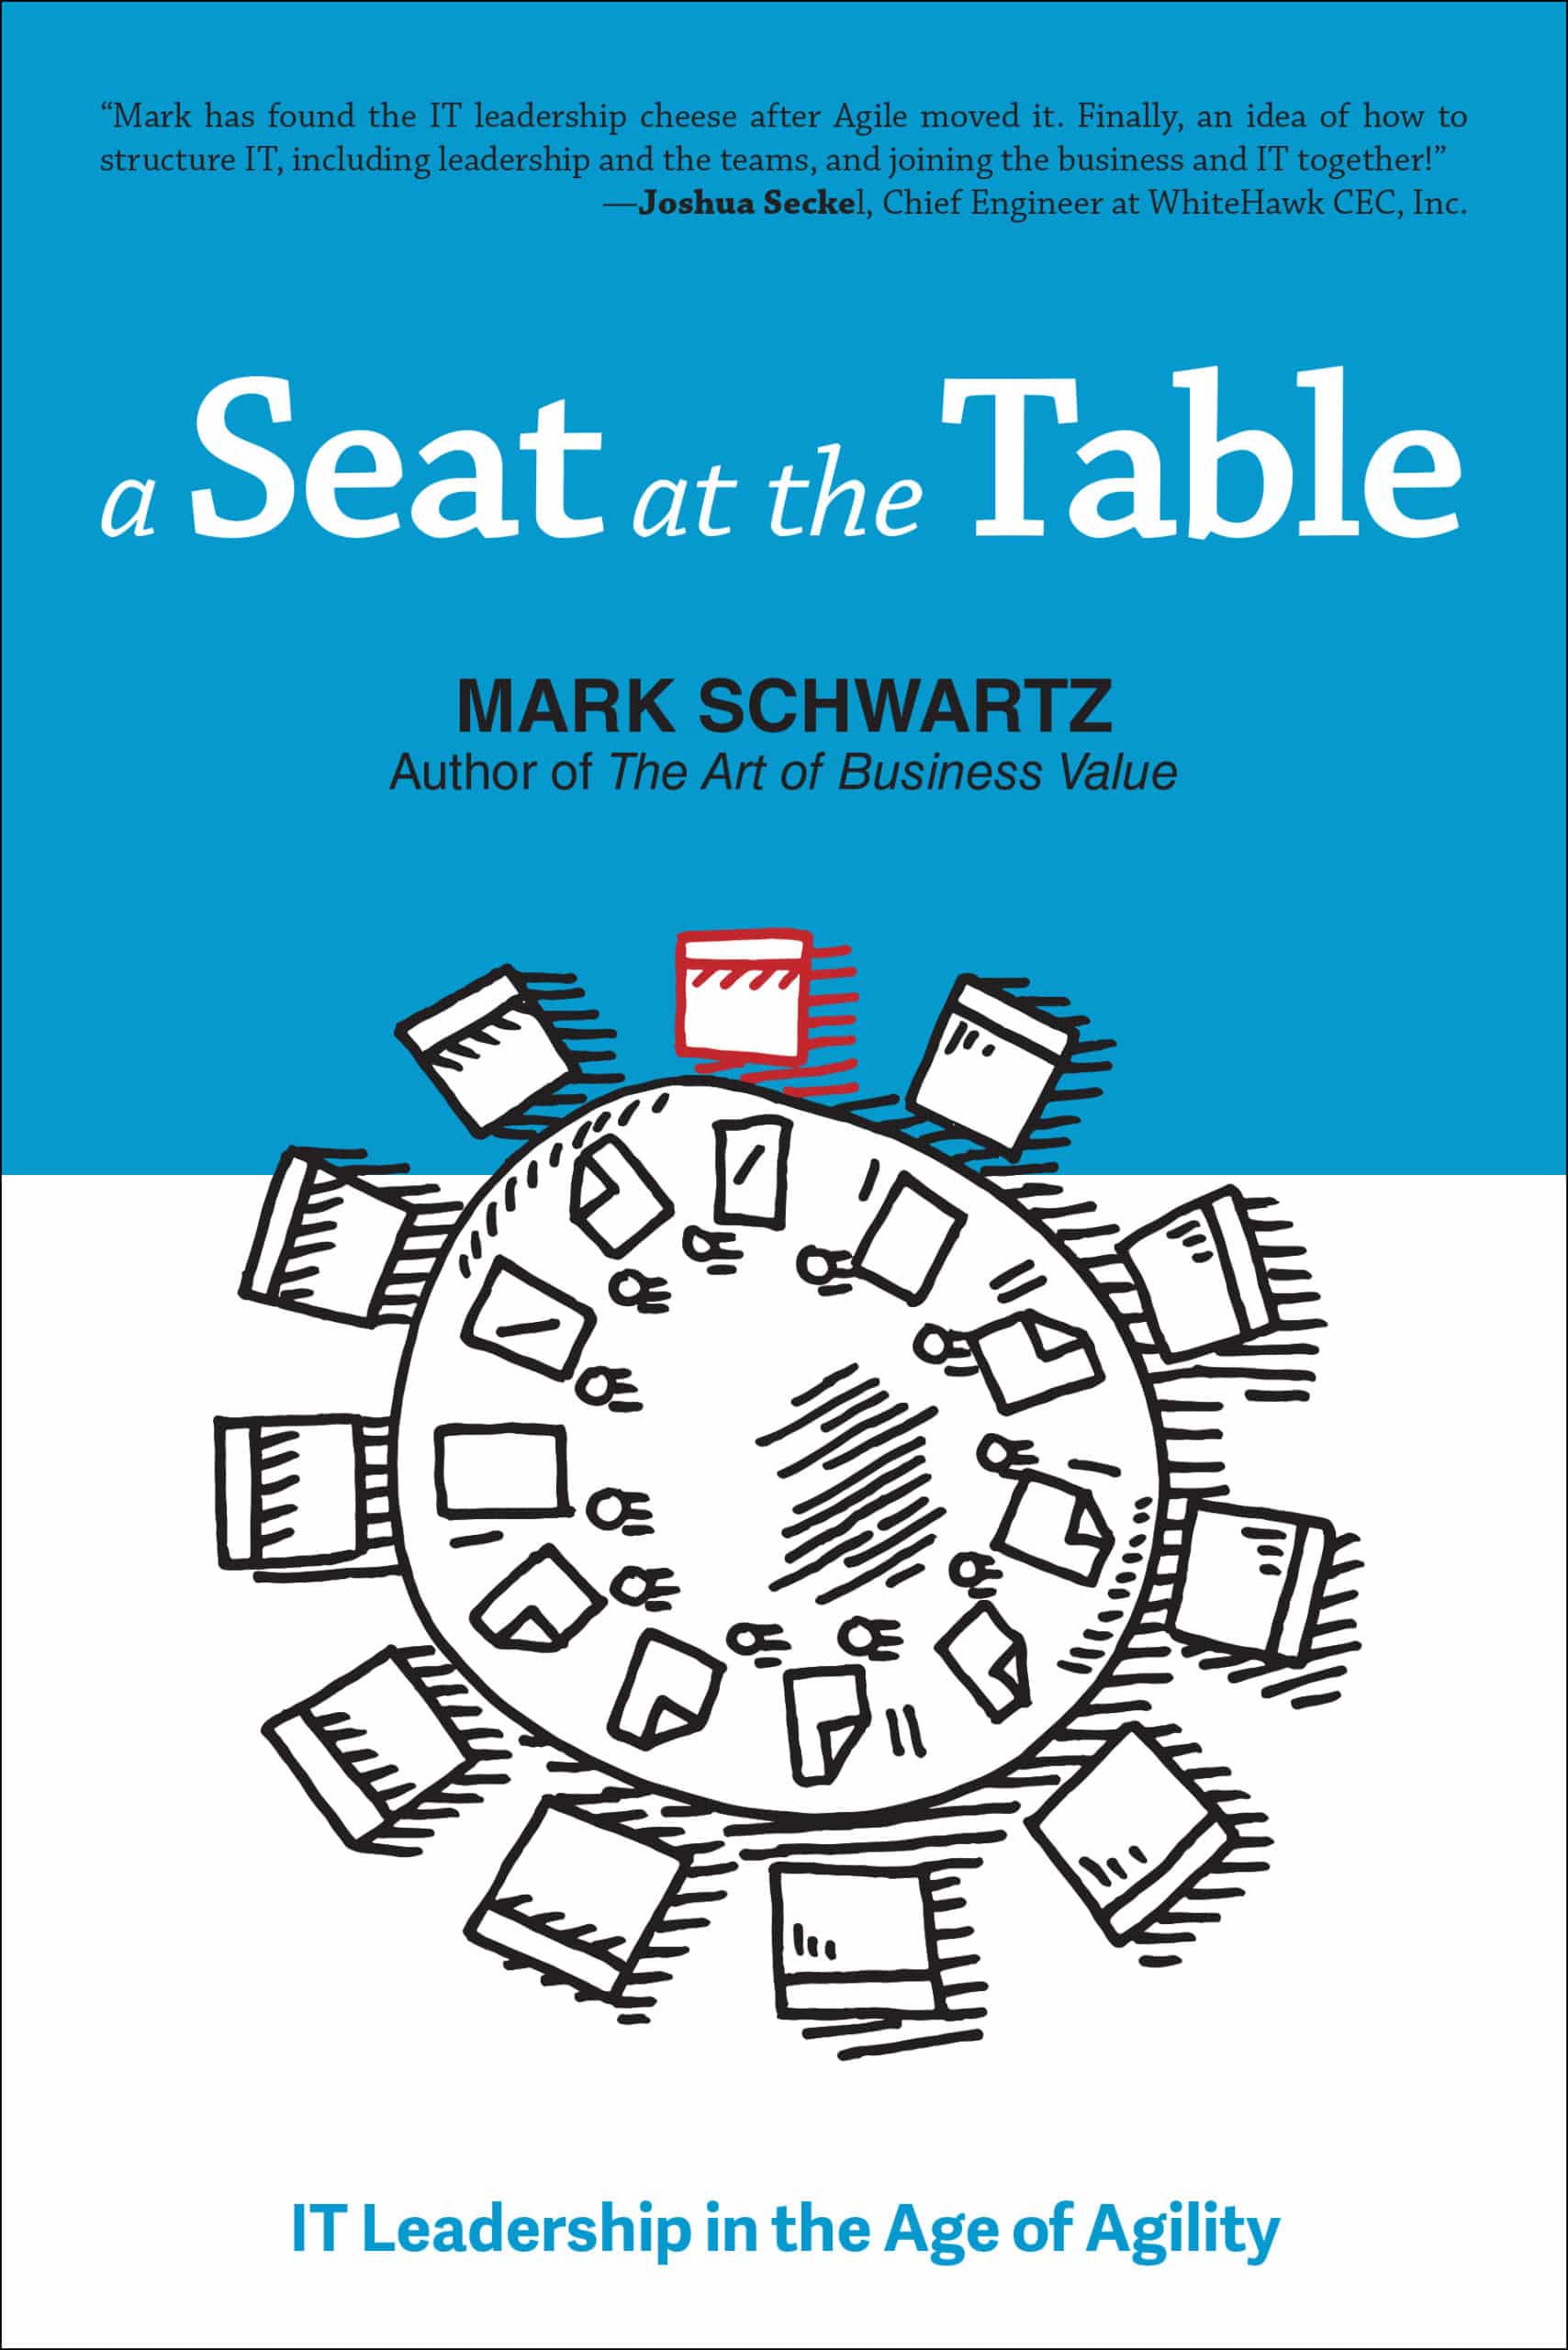 Cover of A Seat at the Table: IT Leadership in the Age of Agility by Mark Schwartz, which also discusses the similarities between Shadow IT and open source software.